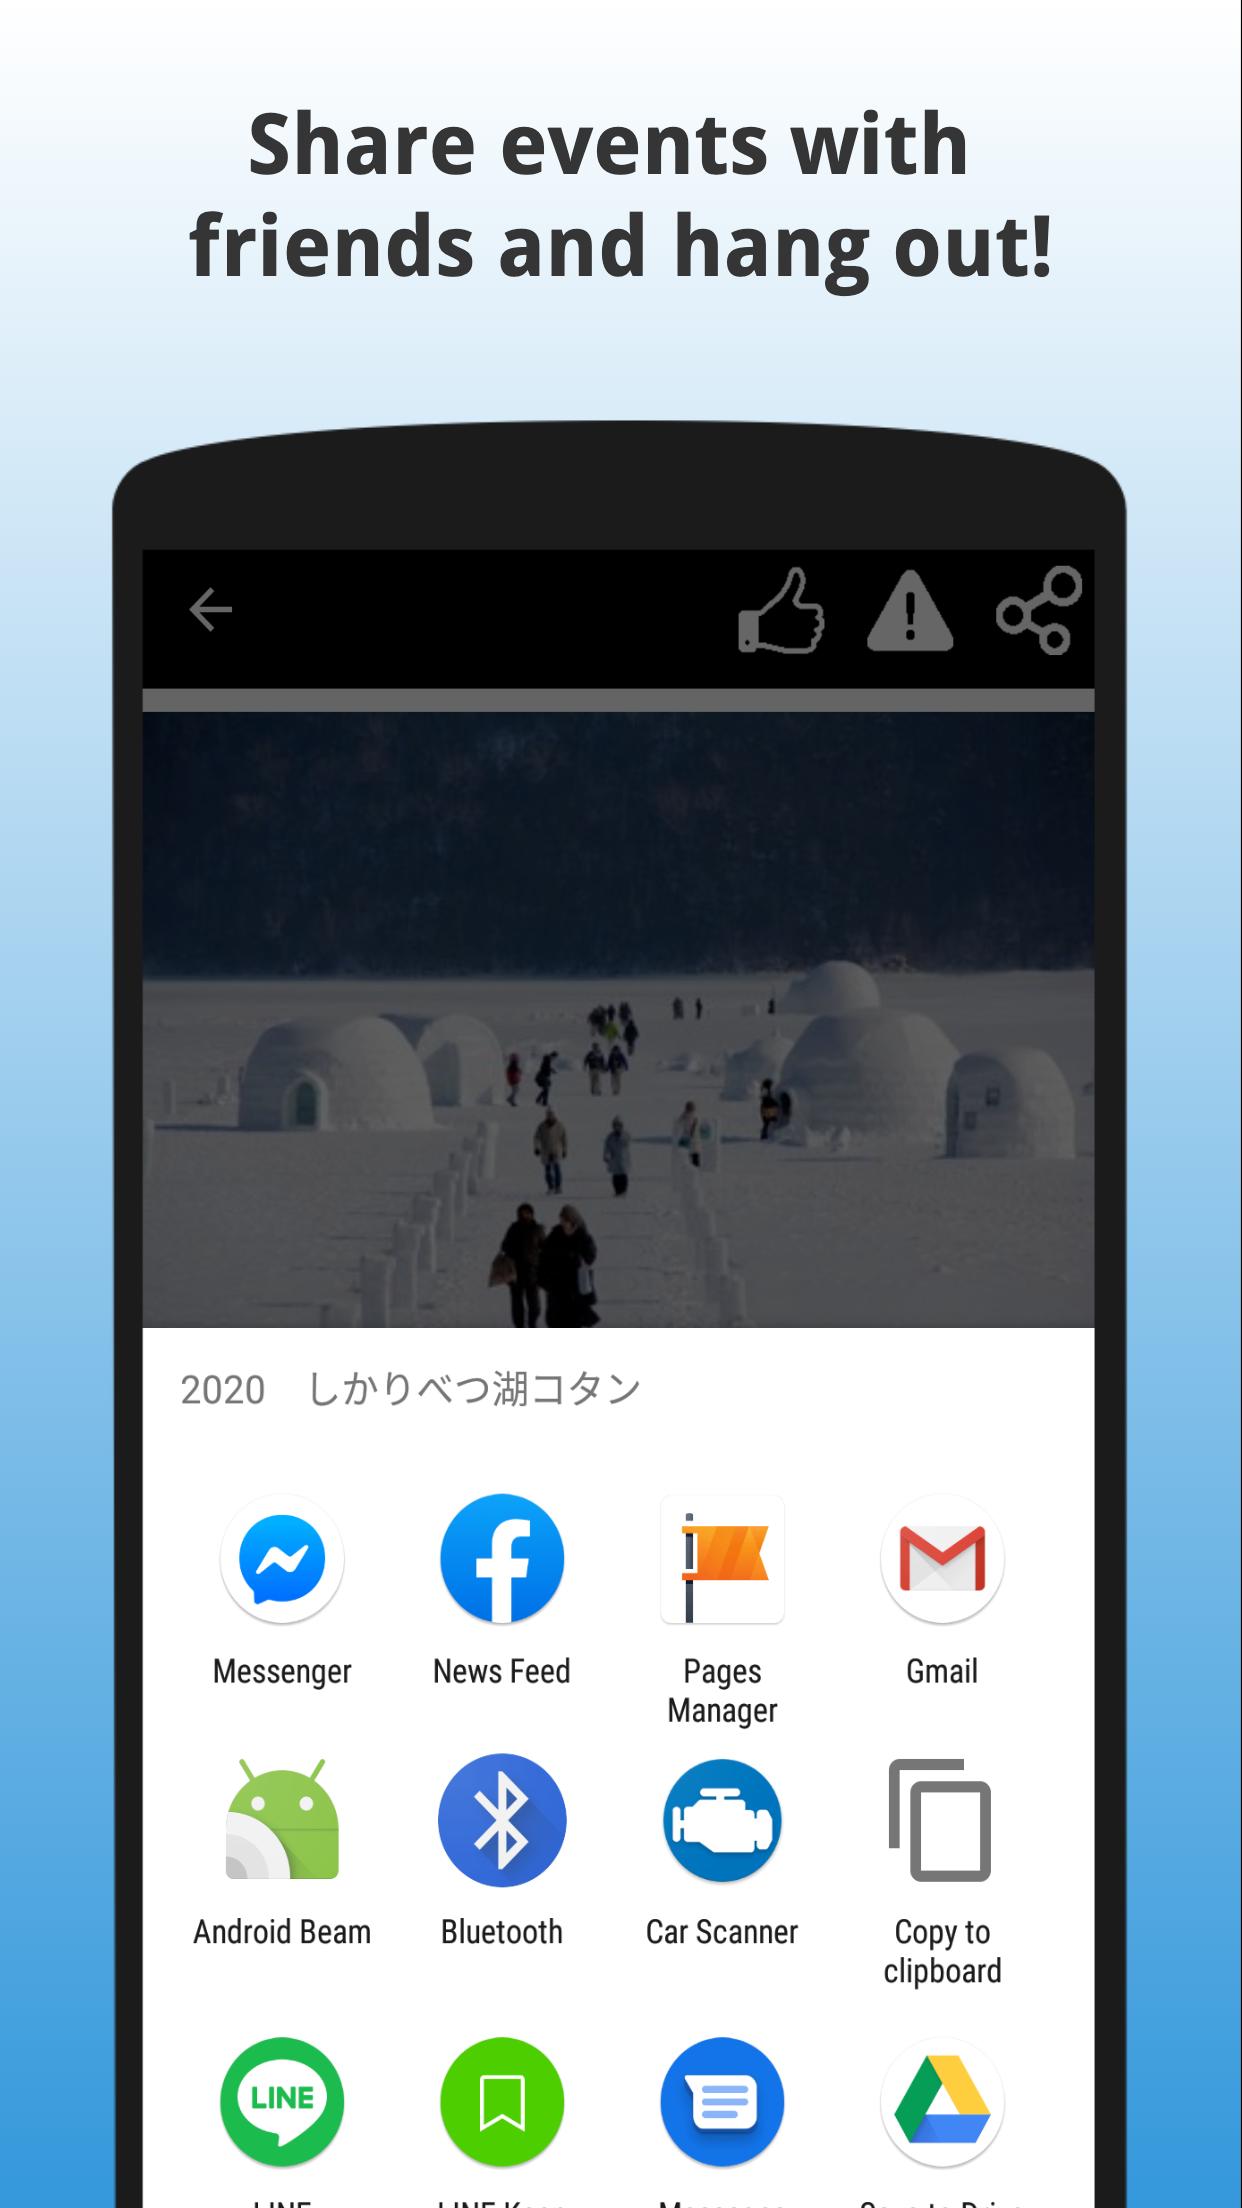 EVENTA - Search & Post Events Near You in Japan 1.0.15 Screenshot 4